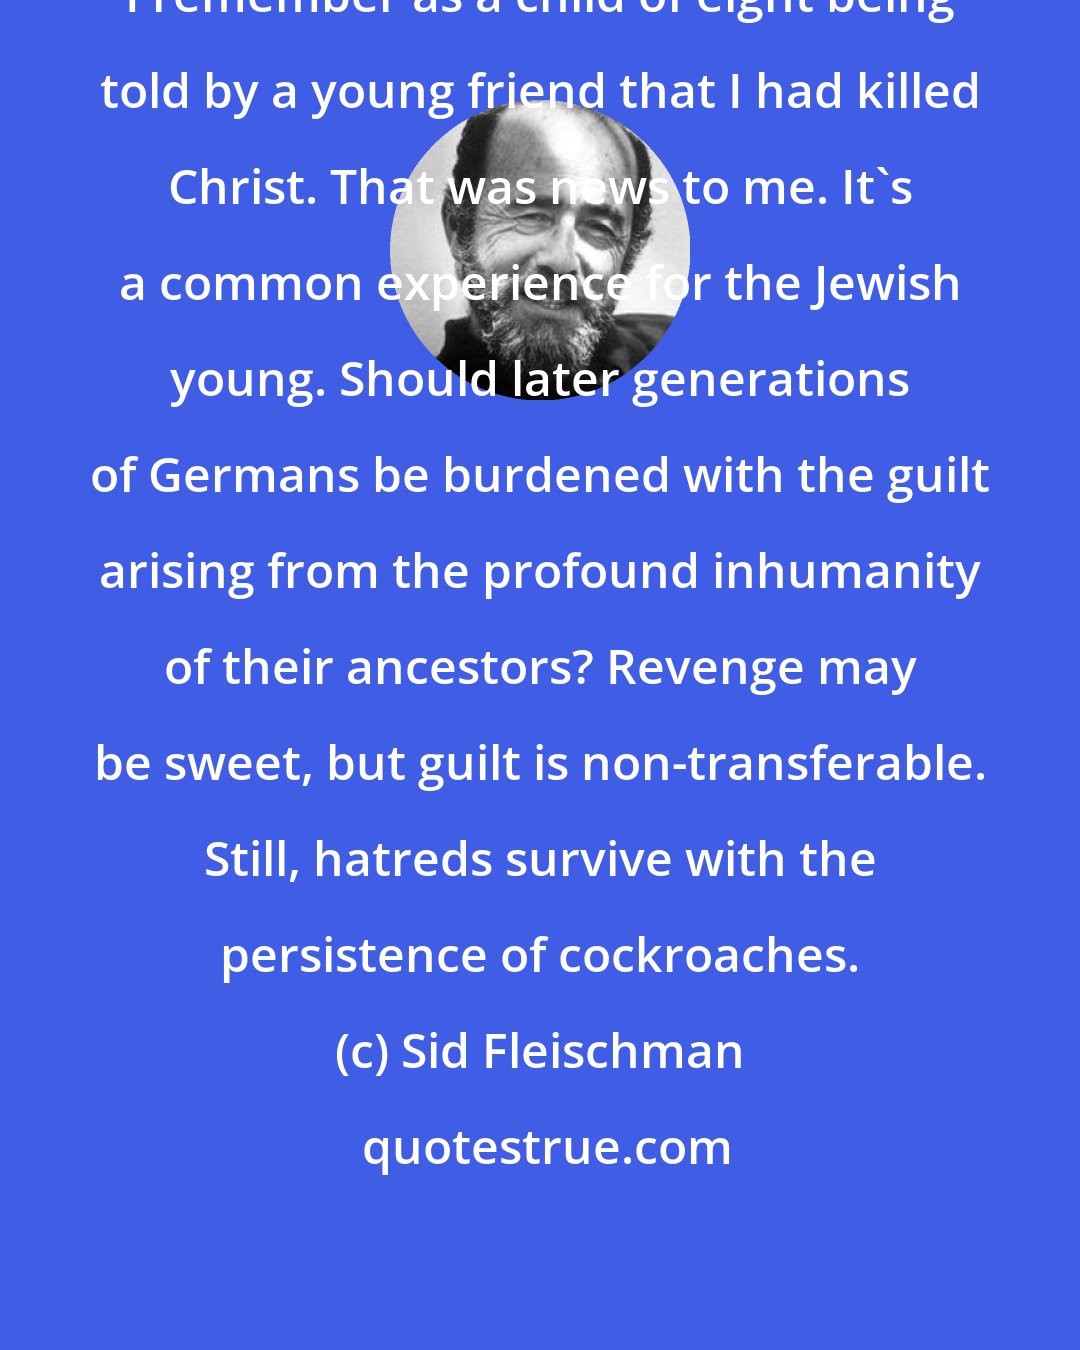 Sid Fleischman: I remember as a child of eight being told by a young friend that I had killed Christ. That was news to me. It's a common experience for the Jewish young. Should later generations of Germans be burdened with the guilt arising from the profound inhumanity of their ancestors? Revenge may be sweet, but guilt is non-transferable. Still, hatreds survive with the persistence of cockroaches.